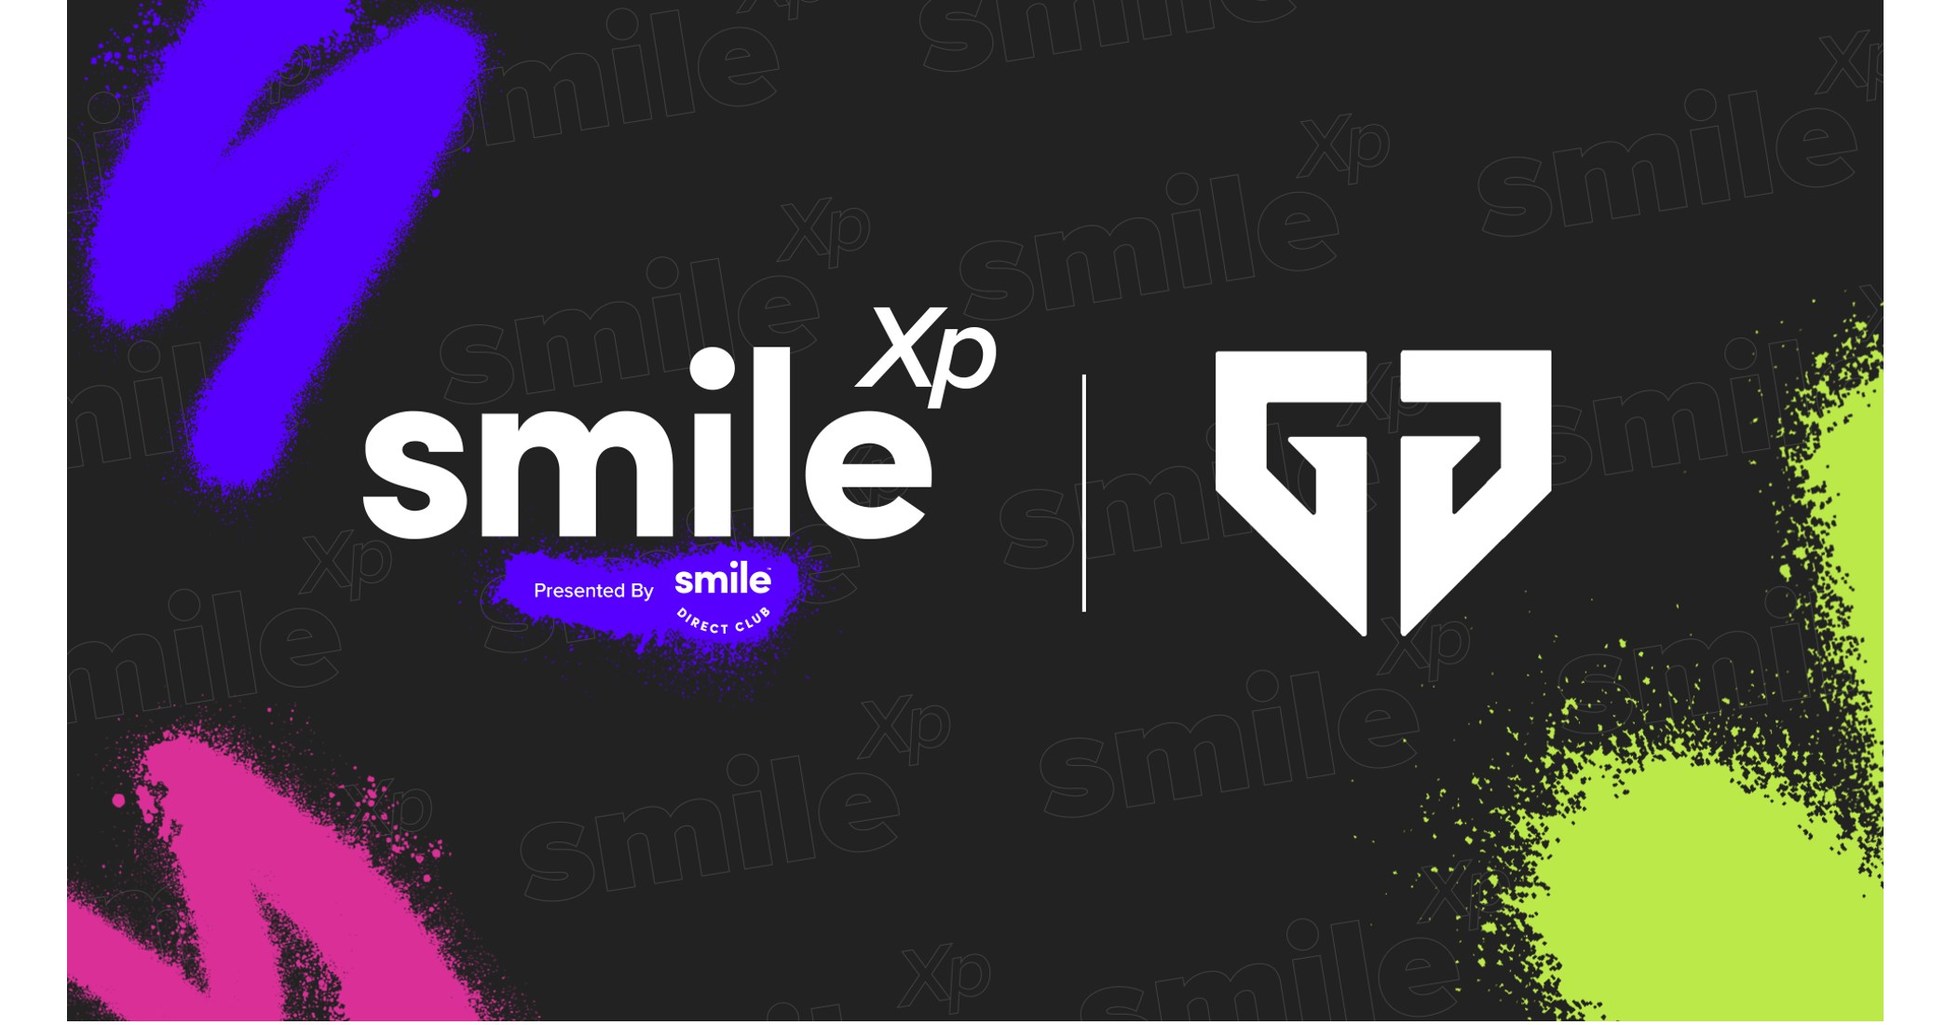 Gen.G and SmileDirectClub Present SmileXP: A Series That Showcases The Transformational Power of a Smile